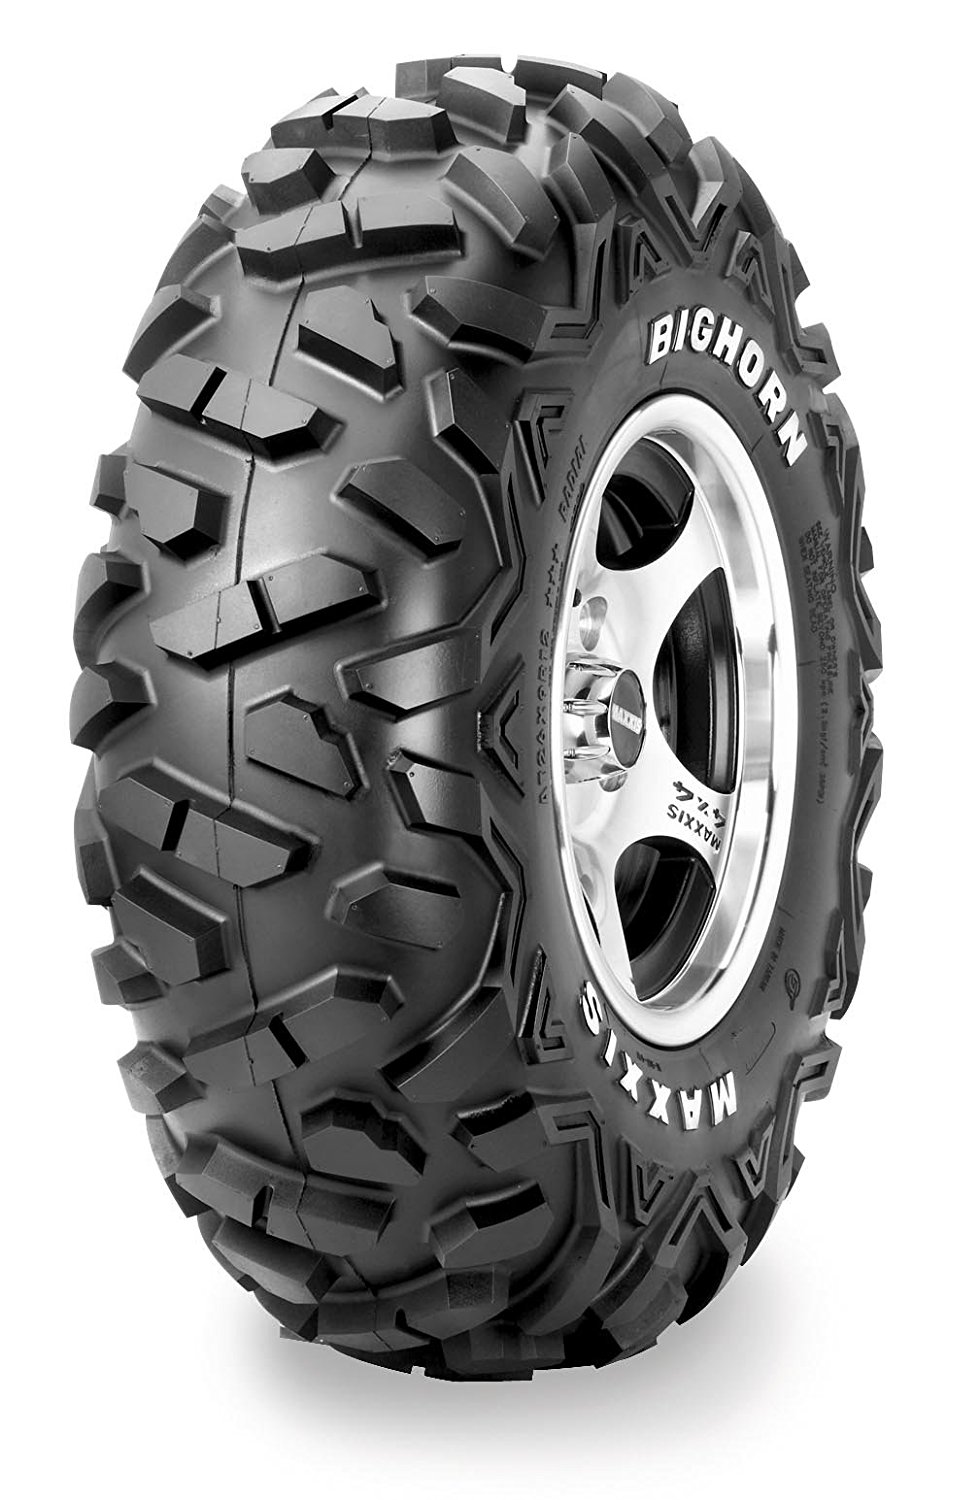 Gomme Nuove Maxxis 25/8 -12 43N BIG HORN M-917 pneumatici nuovi Estivo